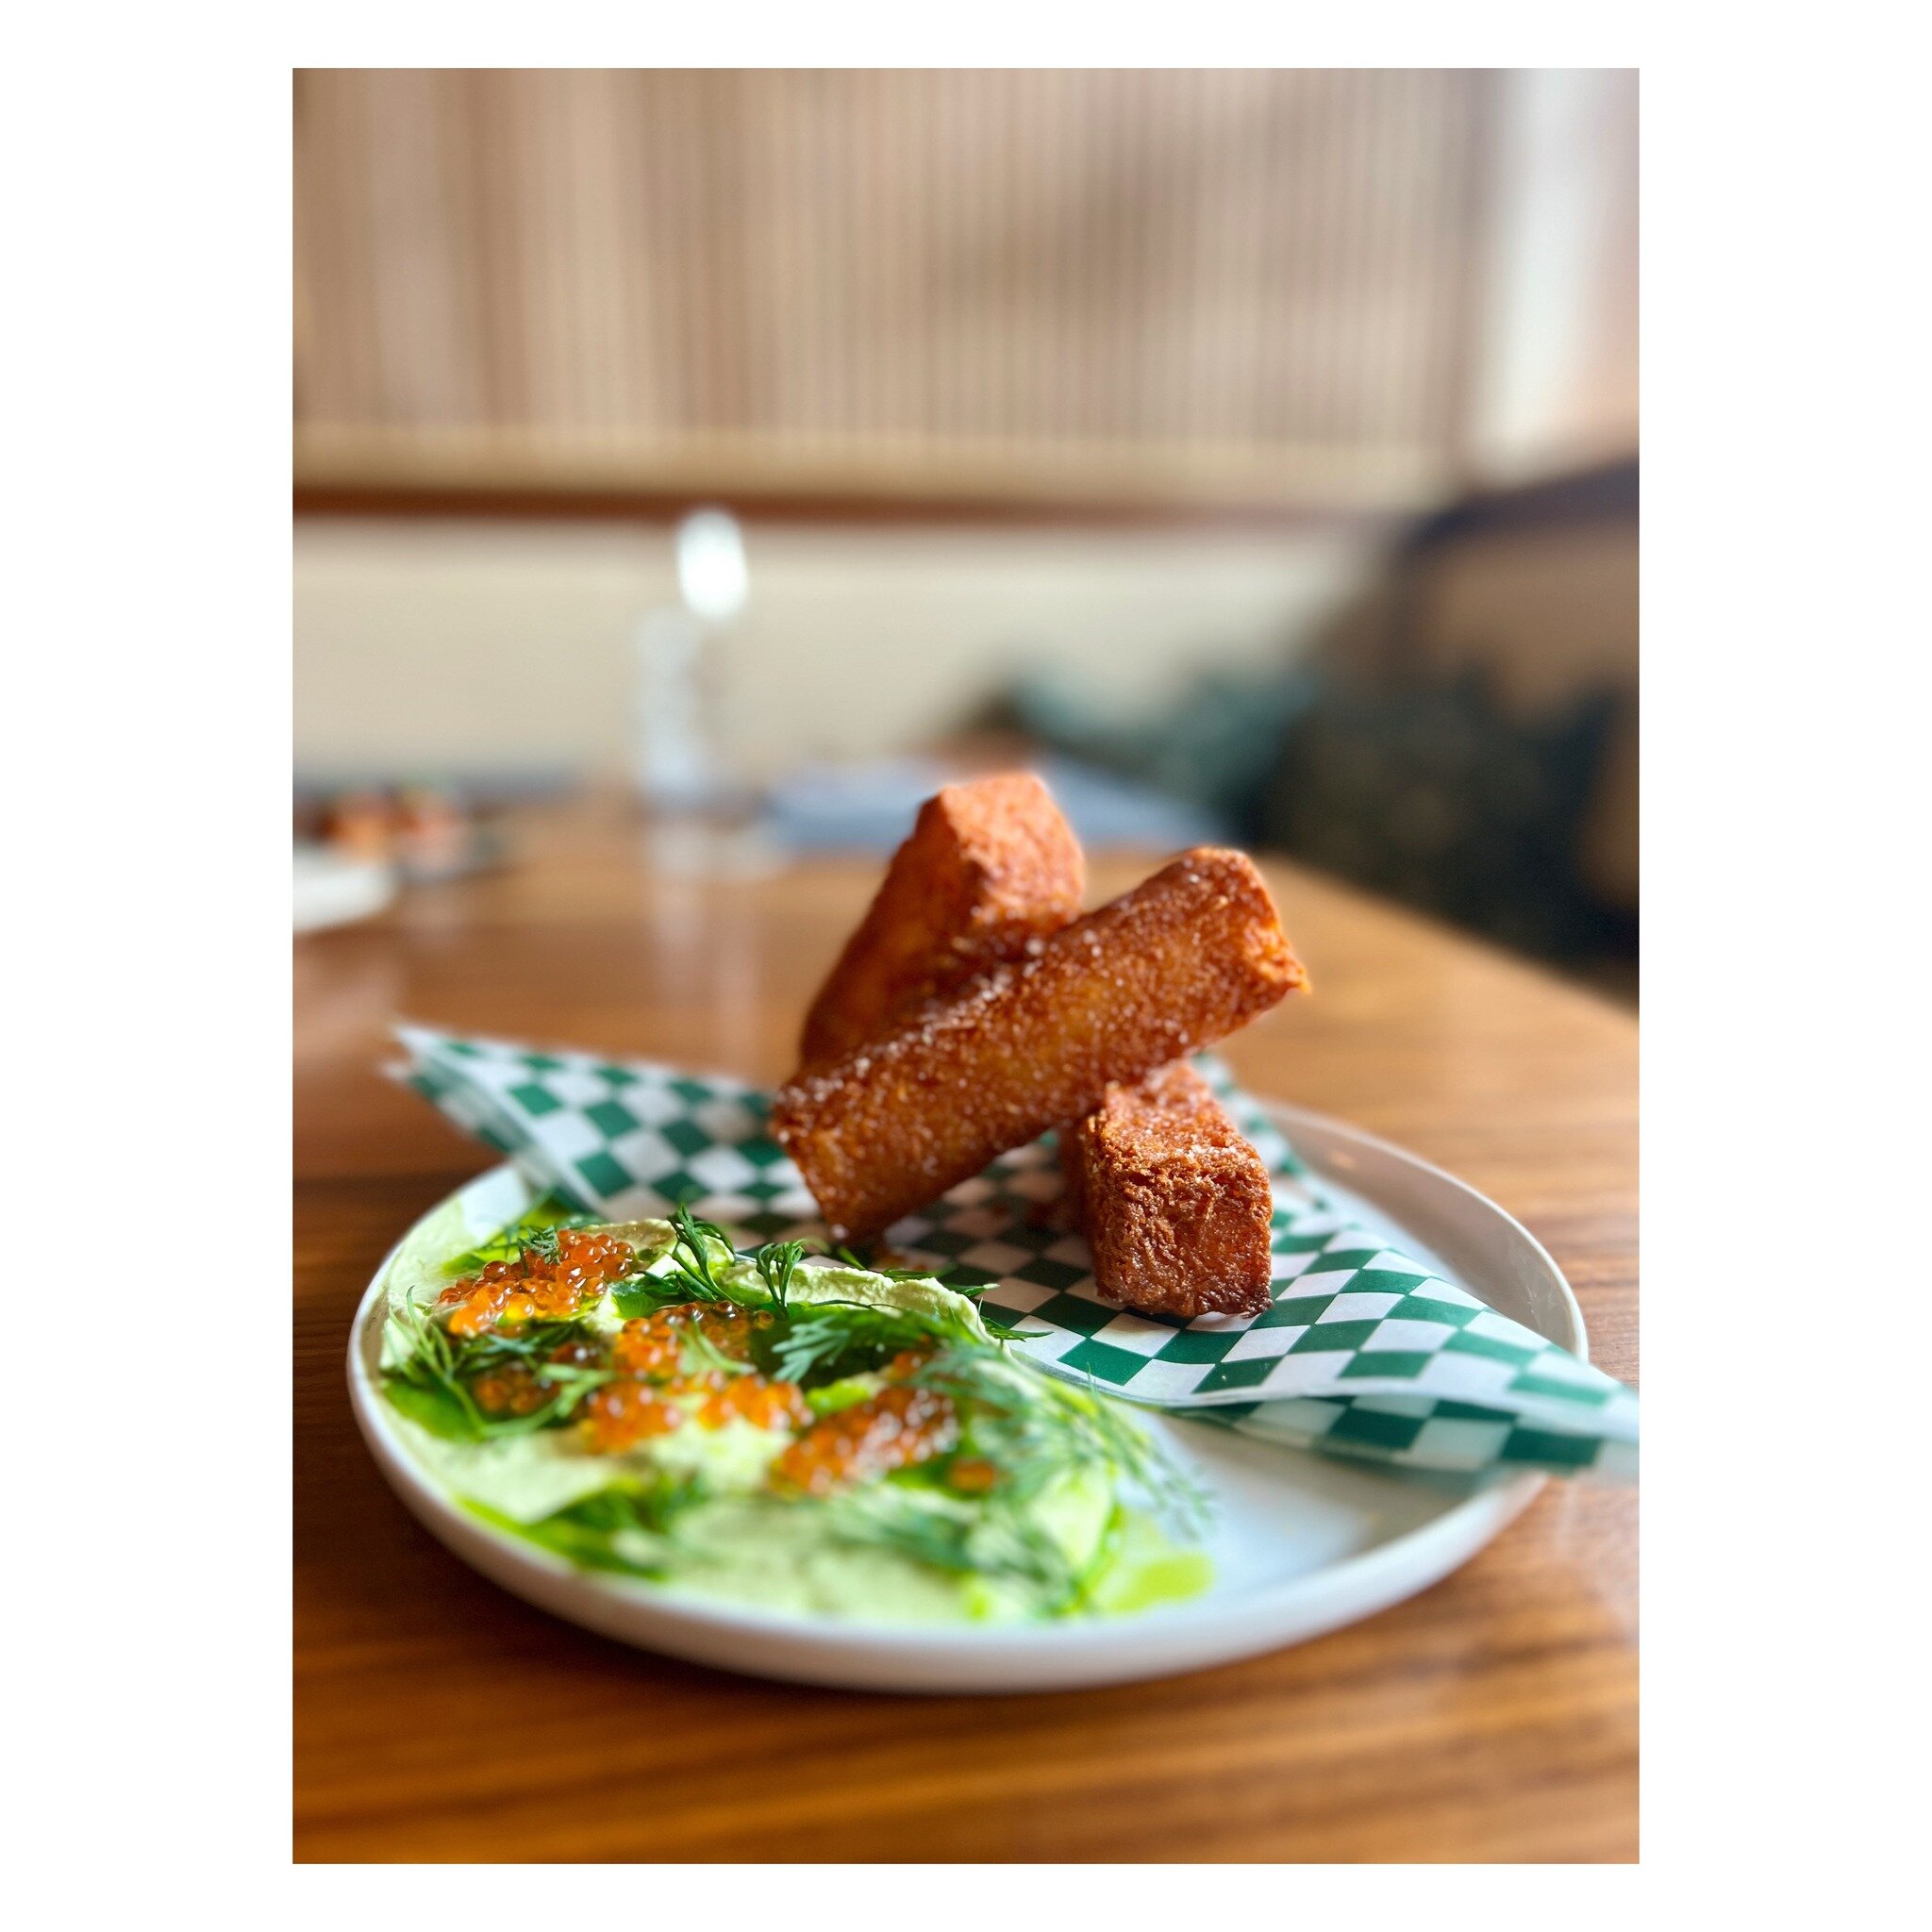 &ldquo;Crispy hash browns: The pi&egrave;ce de r&eacute;sistance of an already impressive menu... I debated going back alone the following day to score this plate one more time. I can&rsquo;t rave about it enough. This dish deserves a love letter.&rd